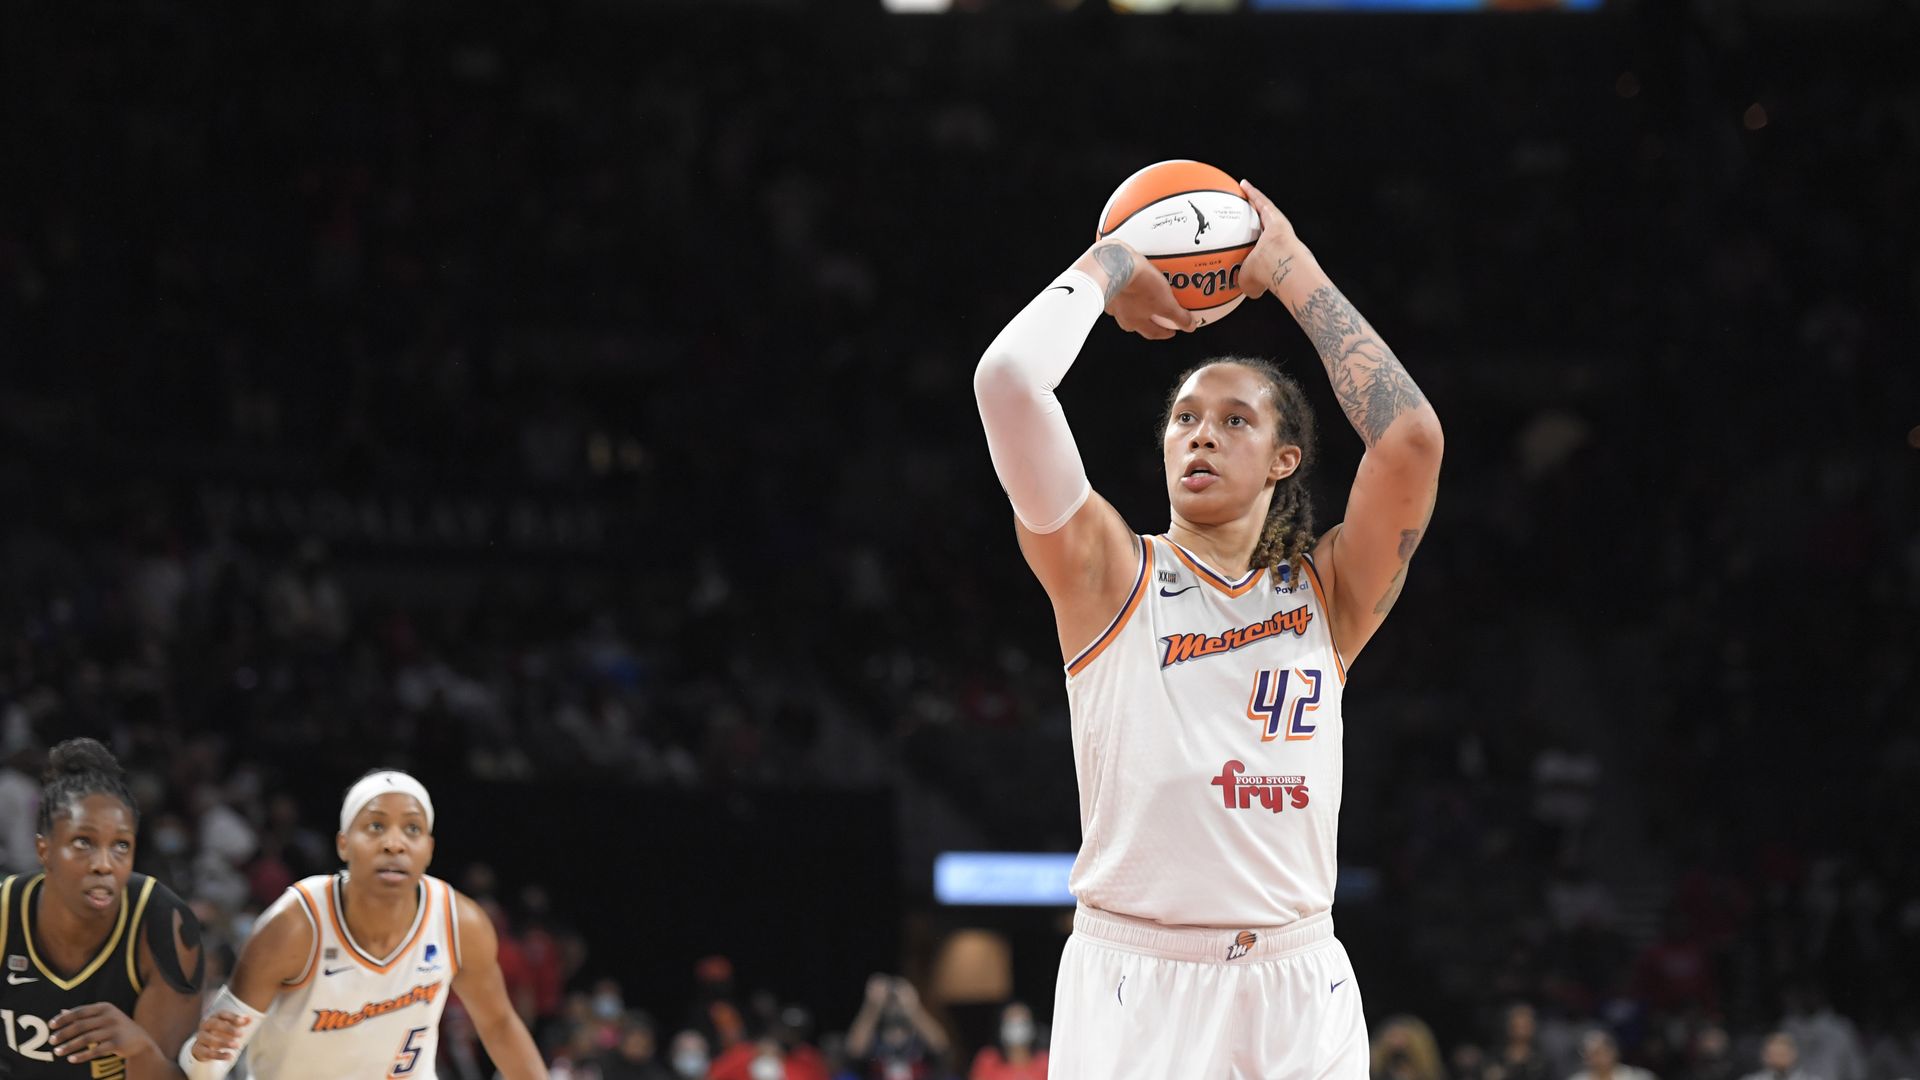 Photo of Brittney Griner holding aiming a basketball in the air on a court as she wears a white and orange Phoenix Mercury uniform